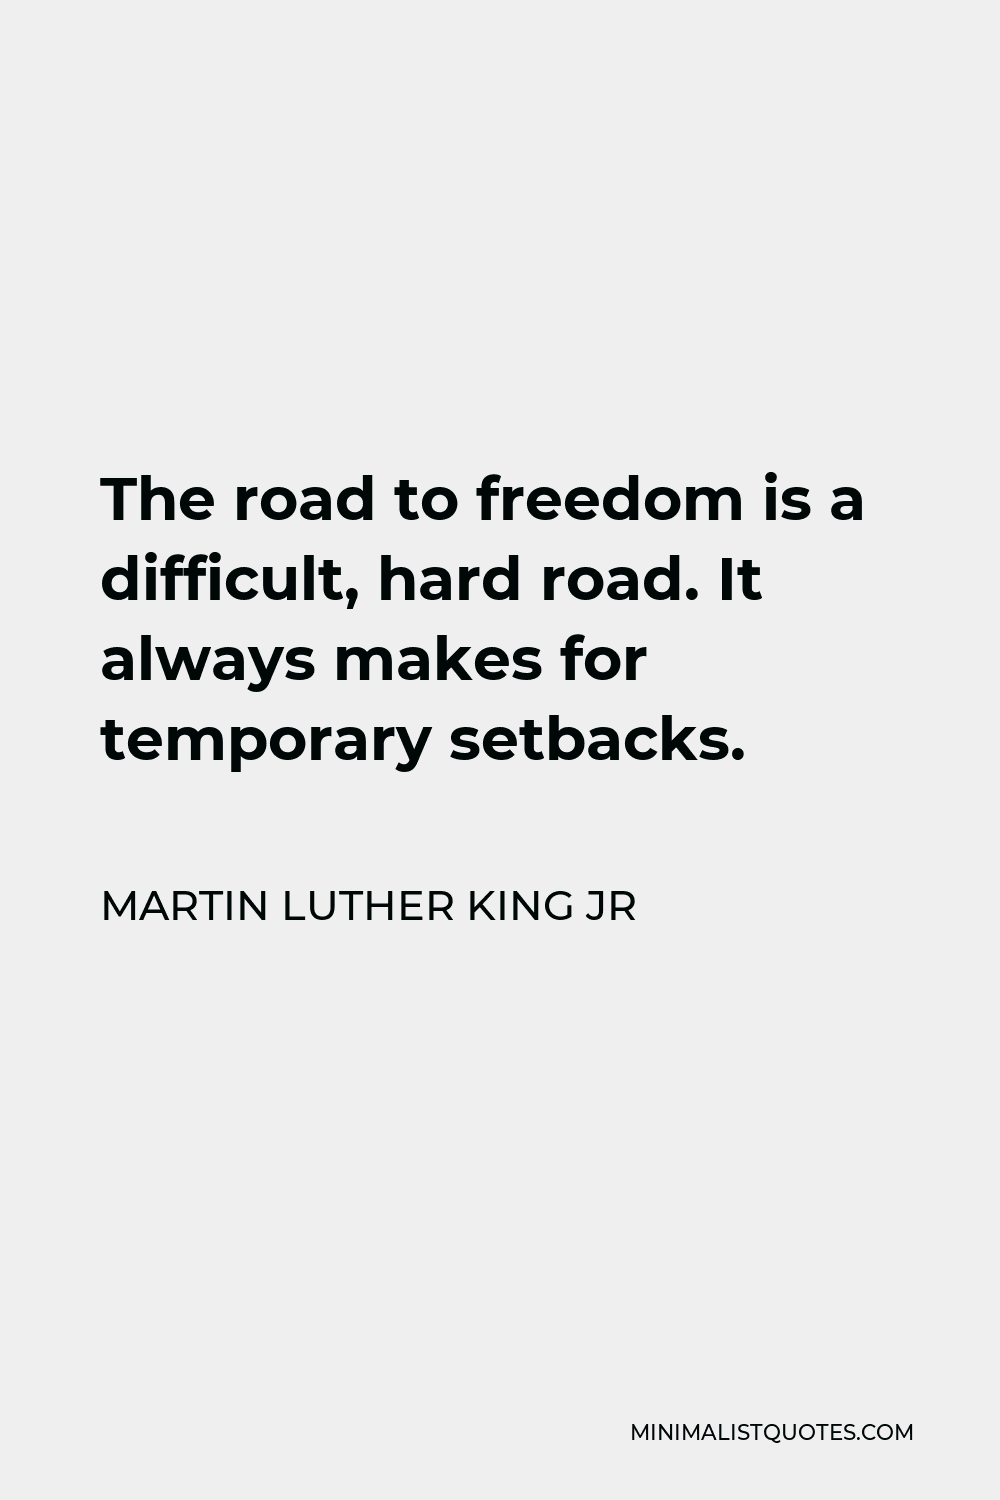 Martin Luther King Jr Quote - The road to freedom is a difficult, hard road. It always makes for temporary setbacks.